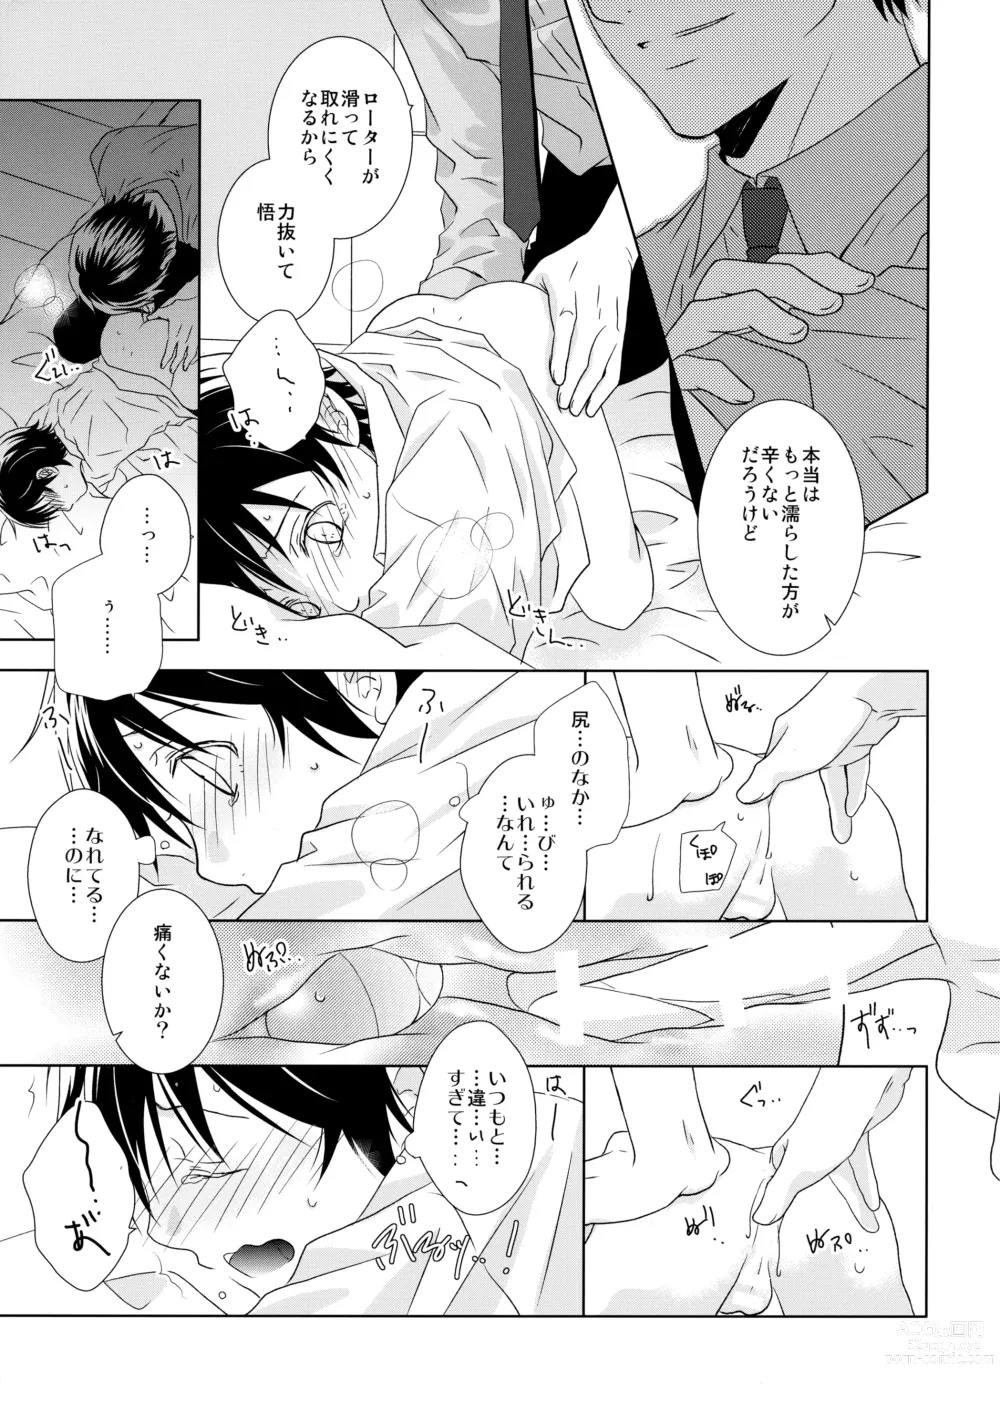 Page 8 of doujinshi Butterfield 8